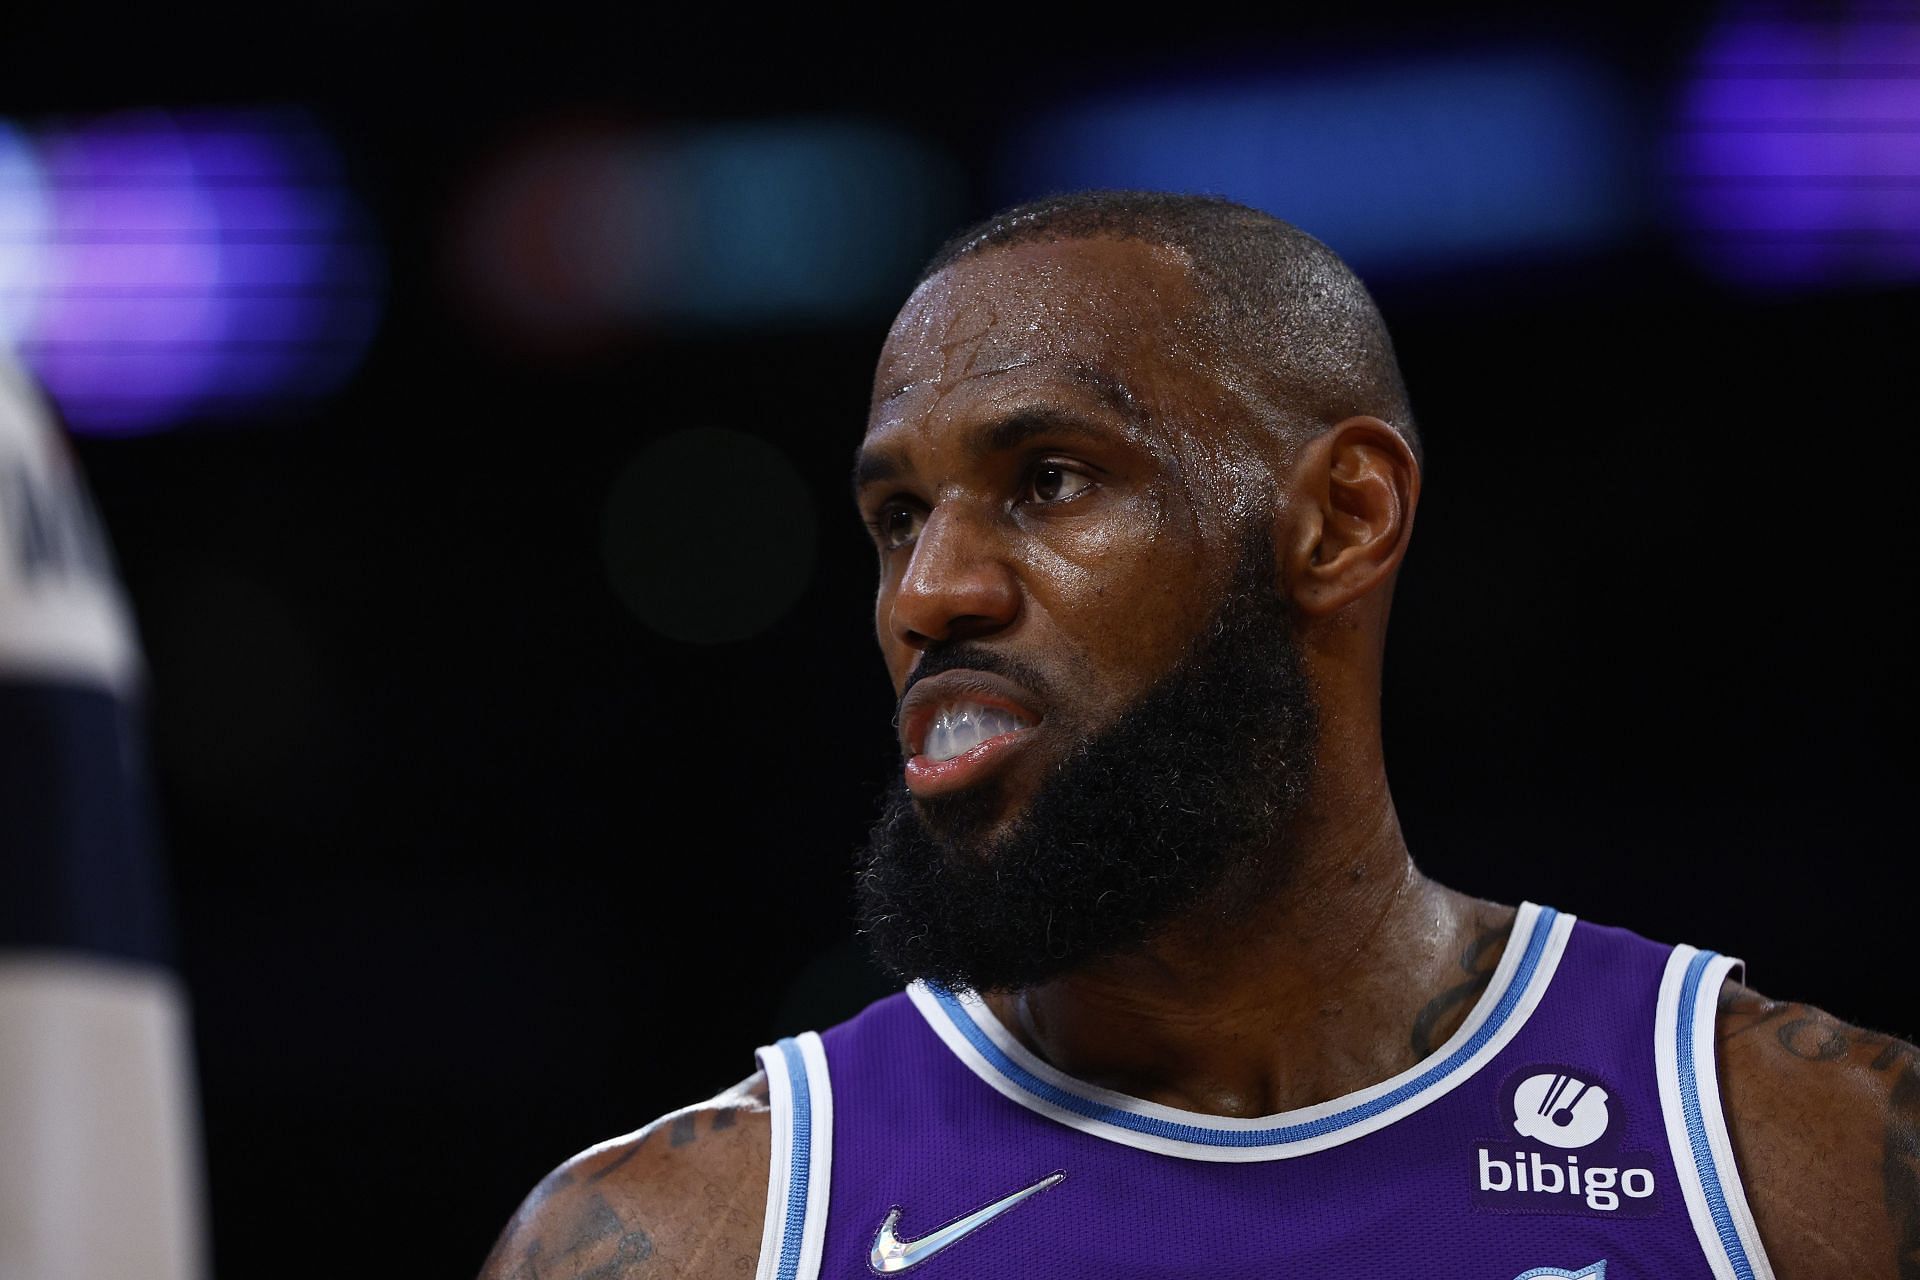 Los Angeles Lakers superstar LeBron James dropped 50 points last time out